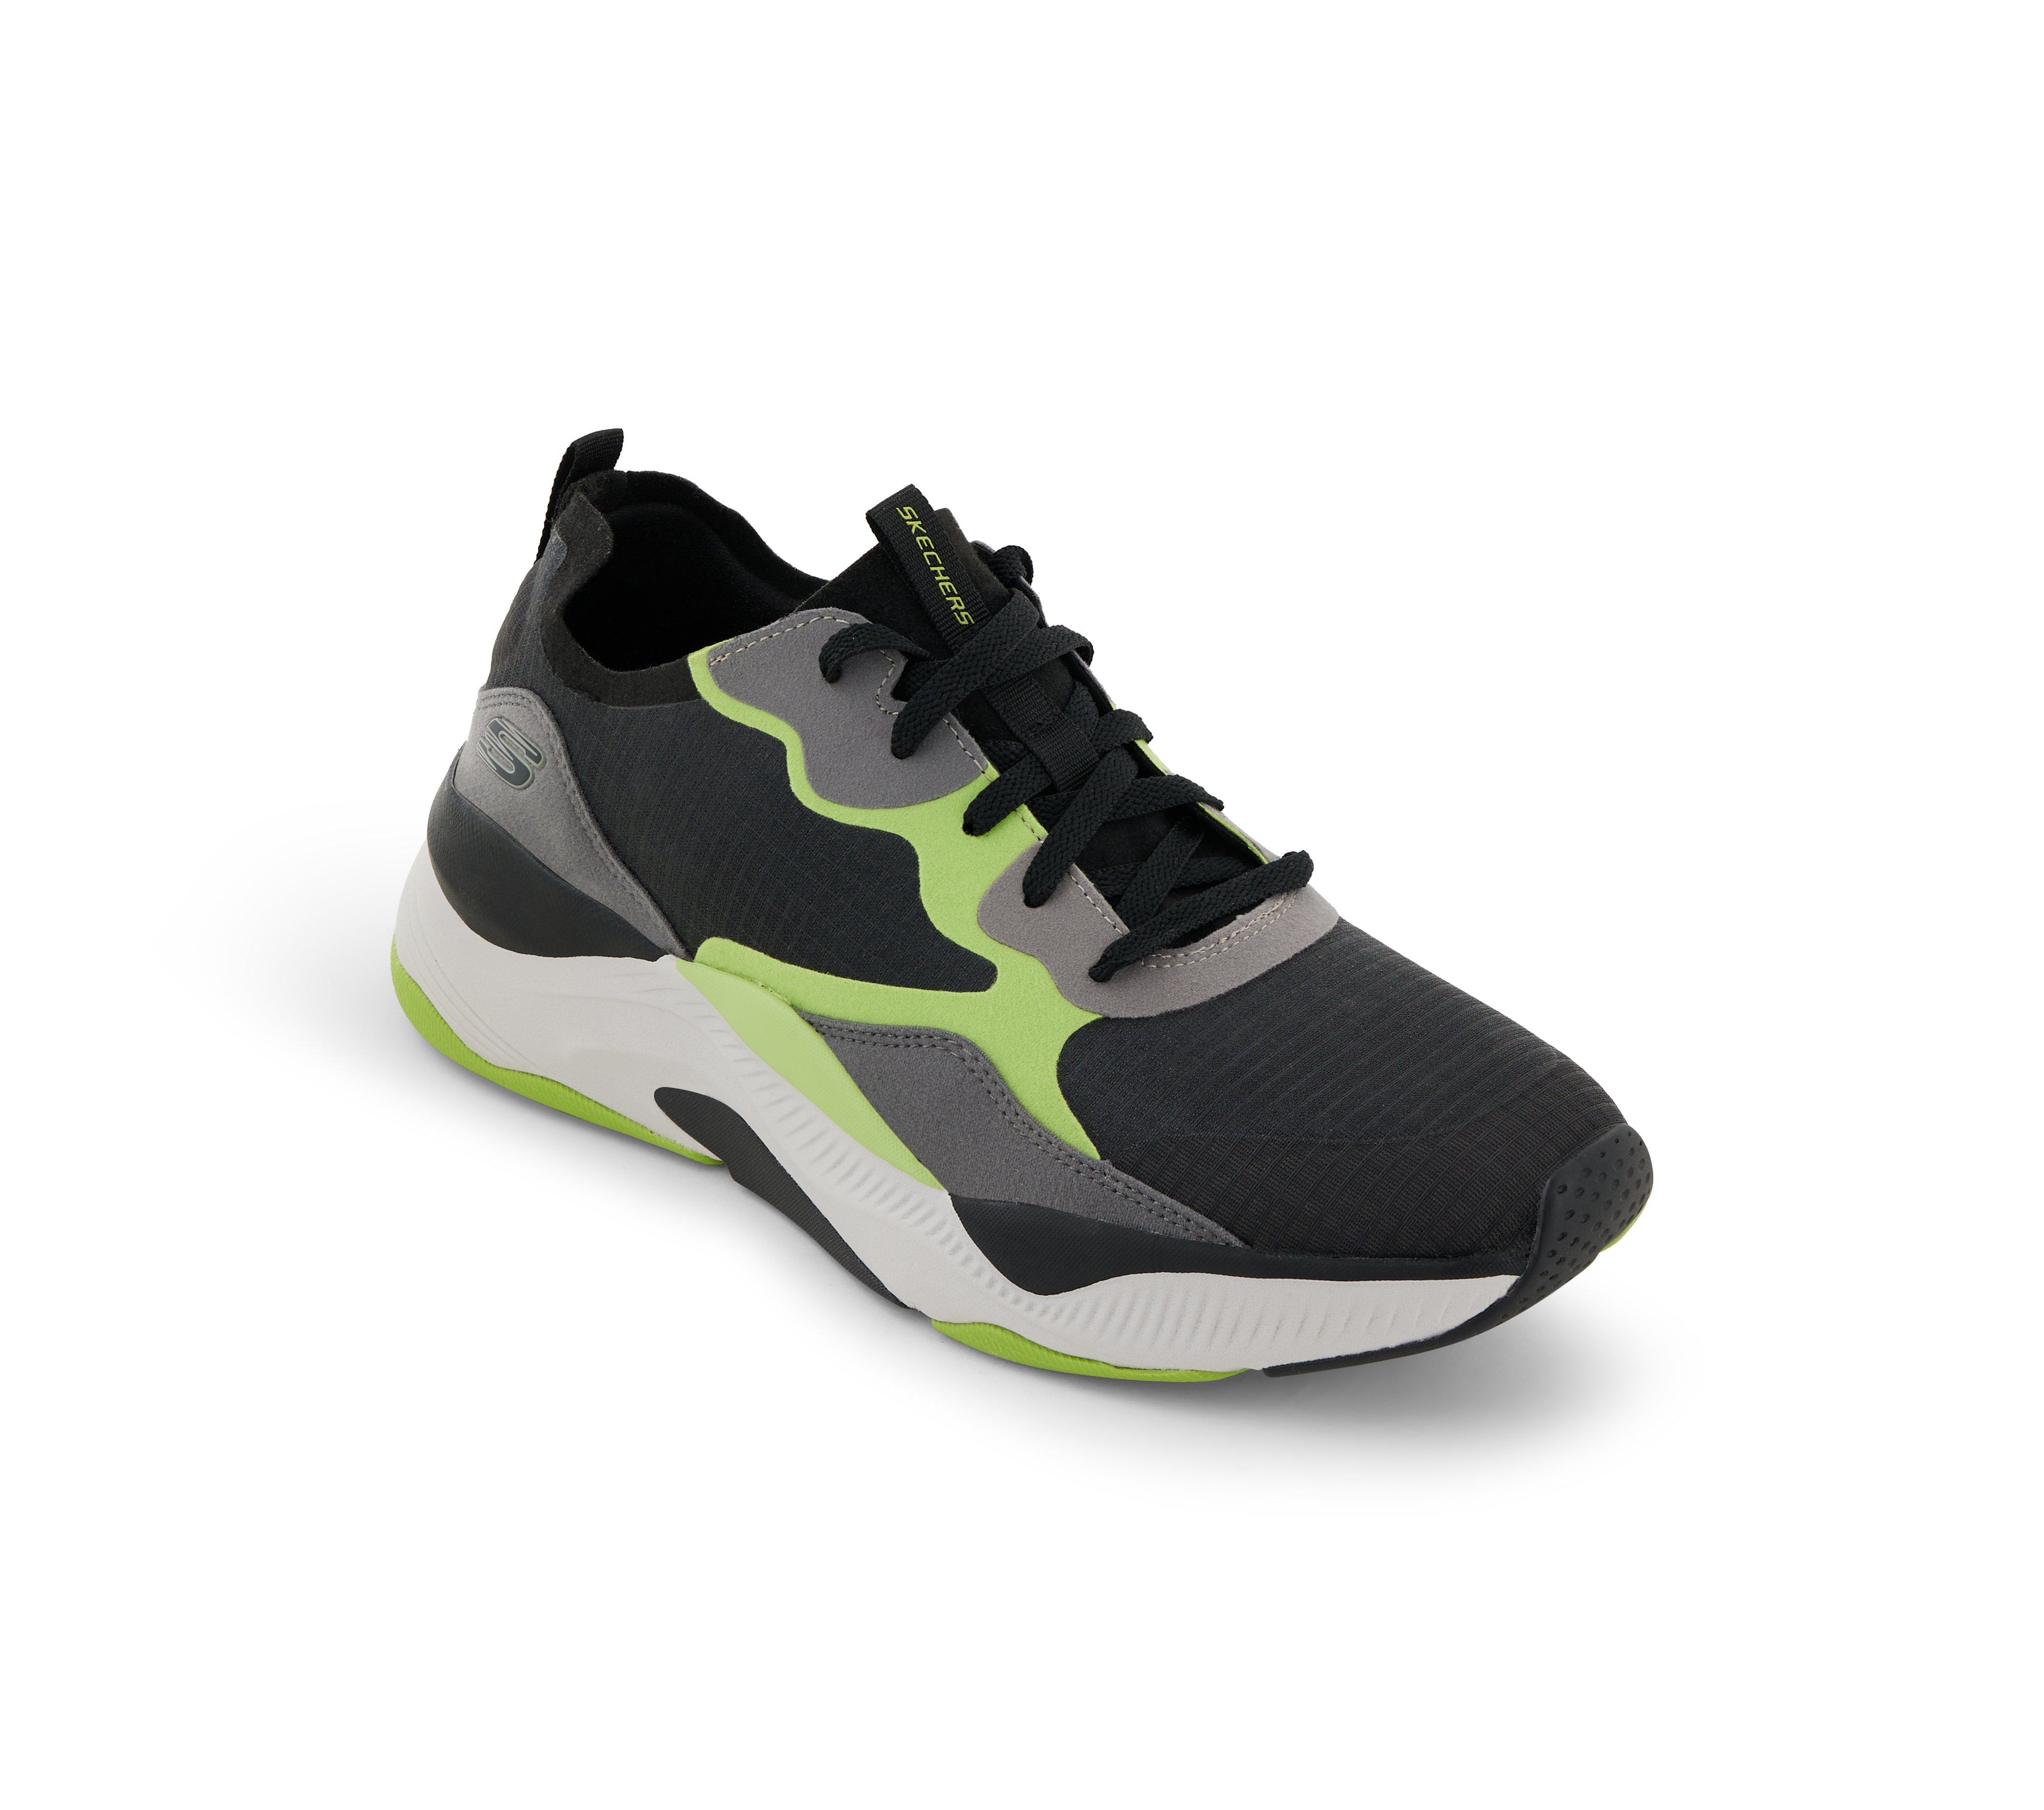 MIRA, BLACK/LIME Footwear Lateral View